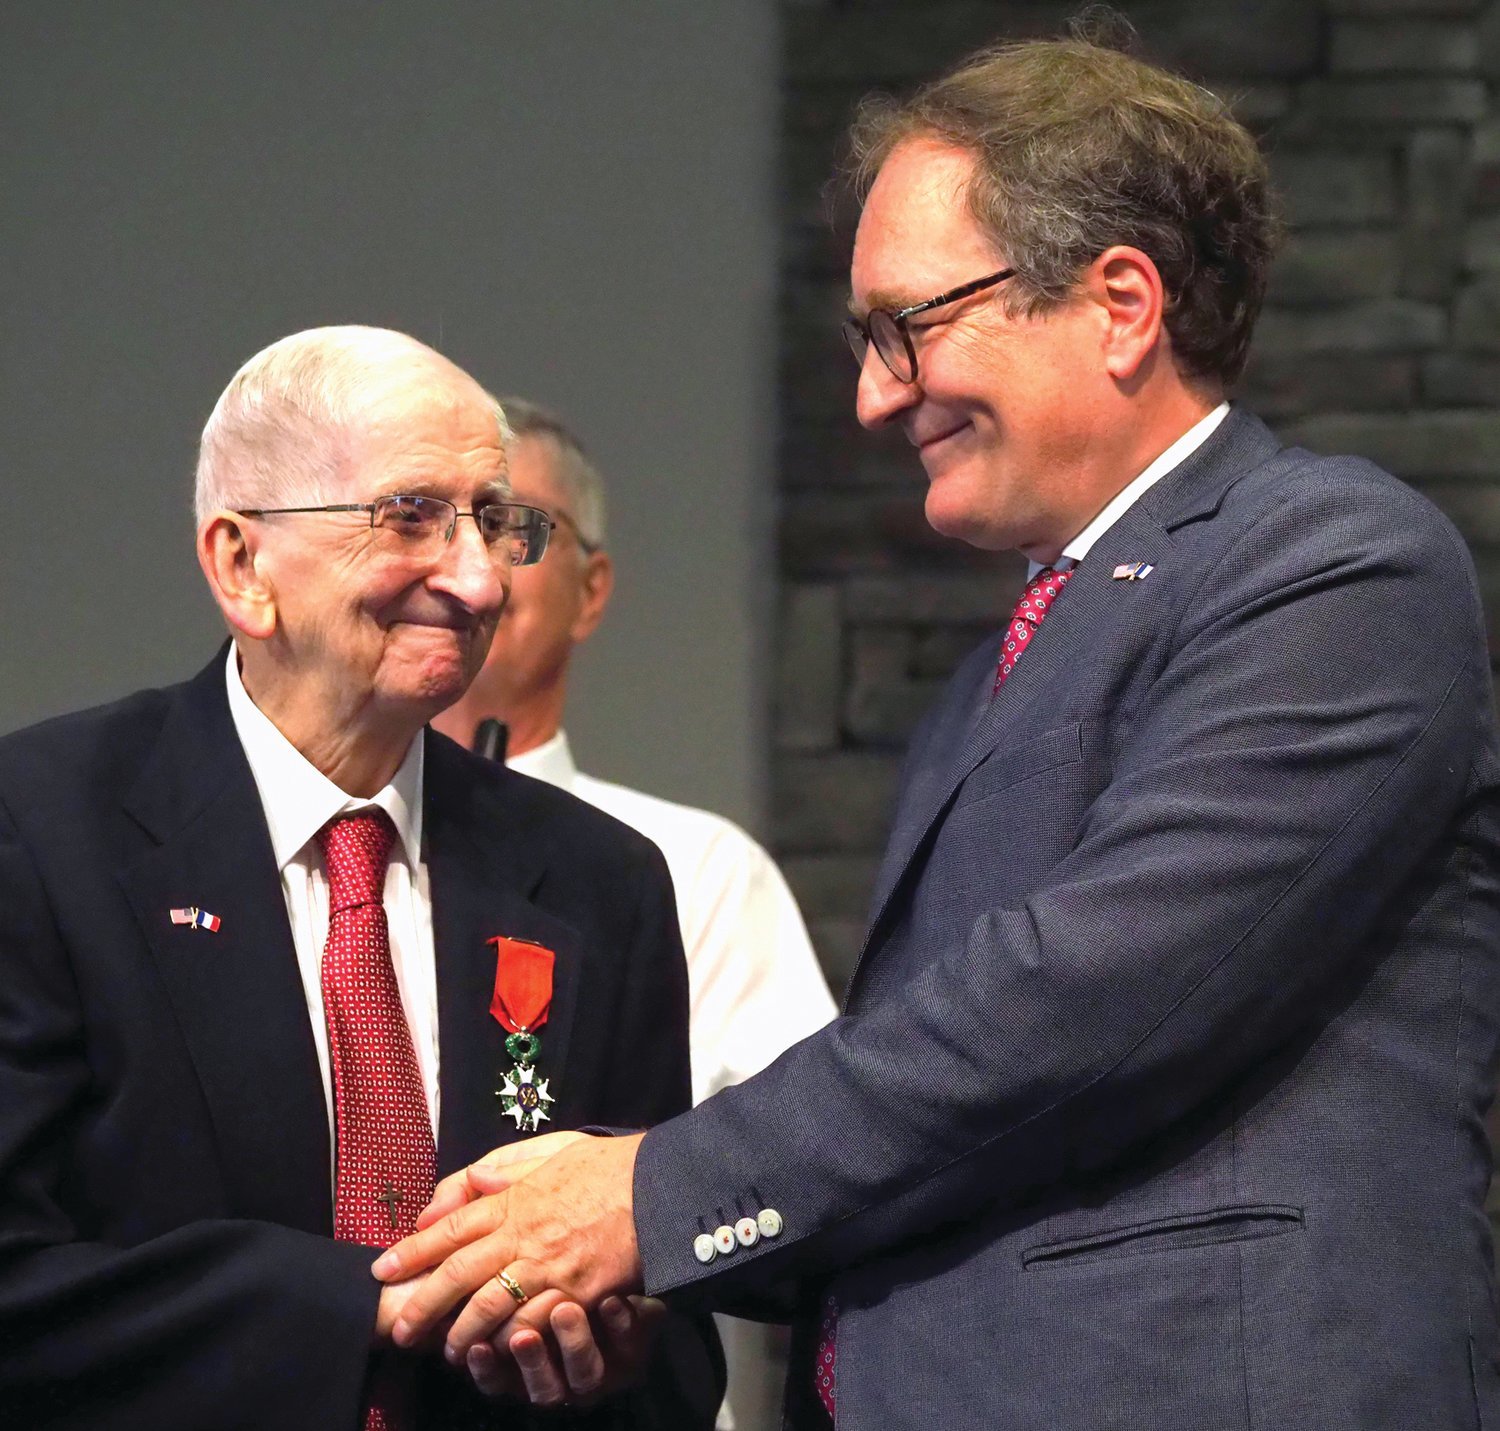 Wesley Hart, a 102-year-old Chatham County resident, is awarded the French Legion of Honor from Vincent Hommeril of the French consulate in Atlanta. Hart's ceremony took place Aug. 12 at New Salem Church in Pittsboro.